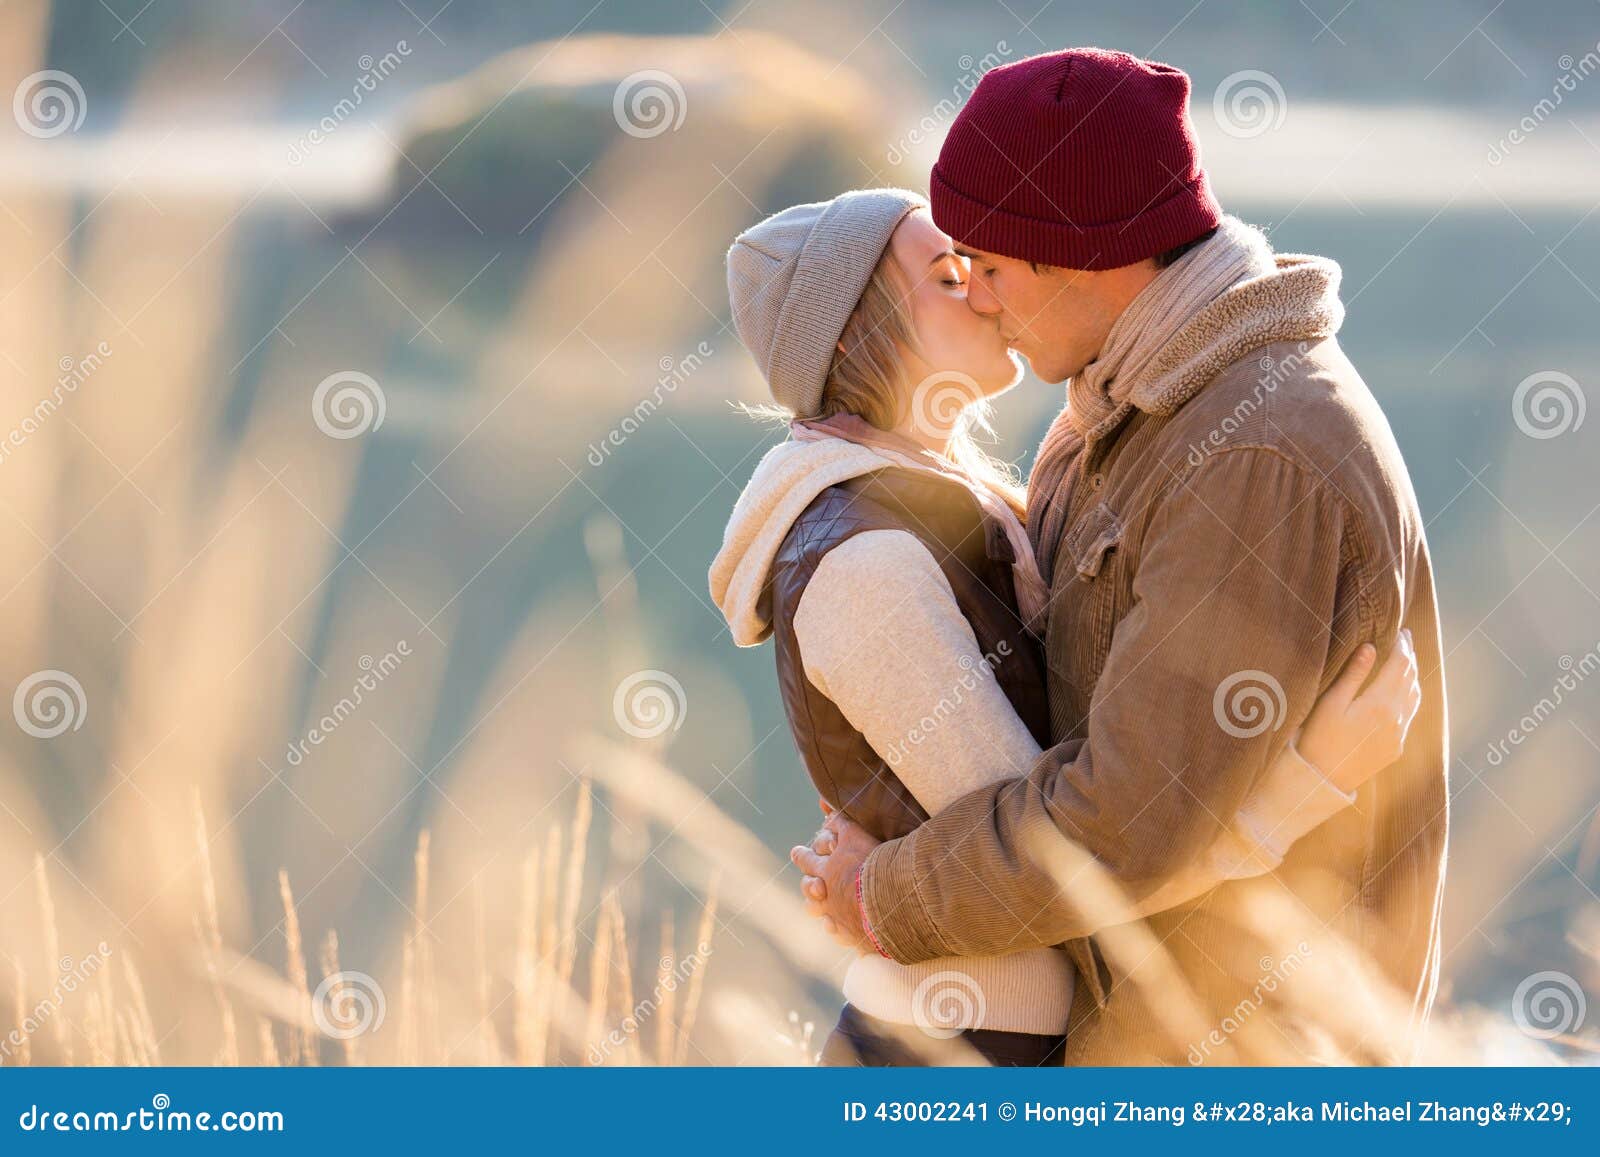 Couple kissing winter stock image. Image of adult, modern - 43002241